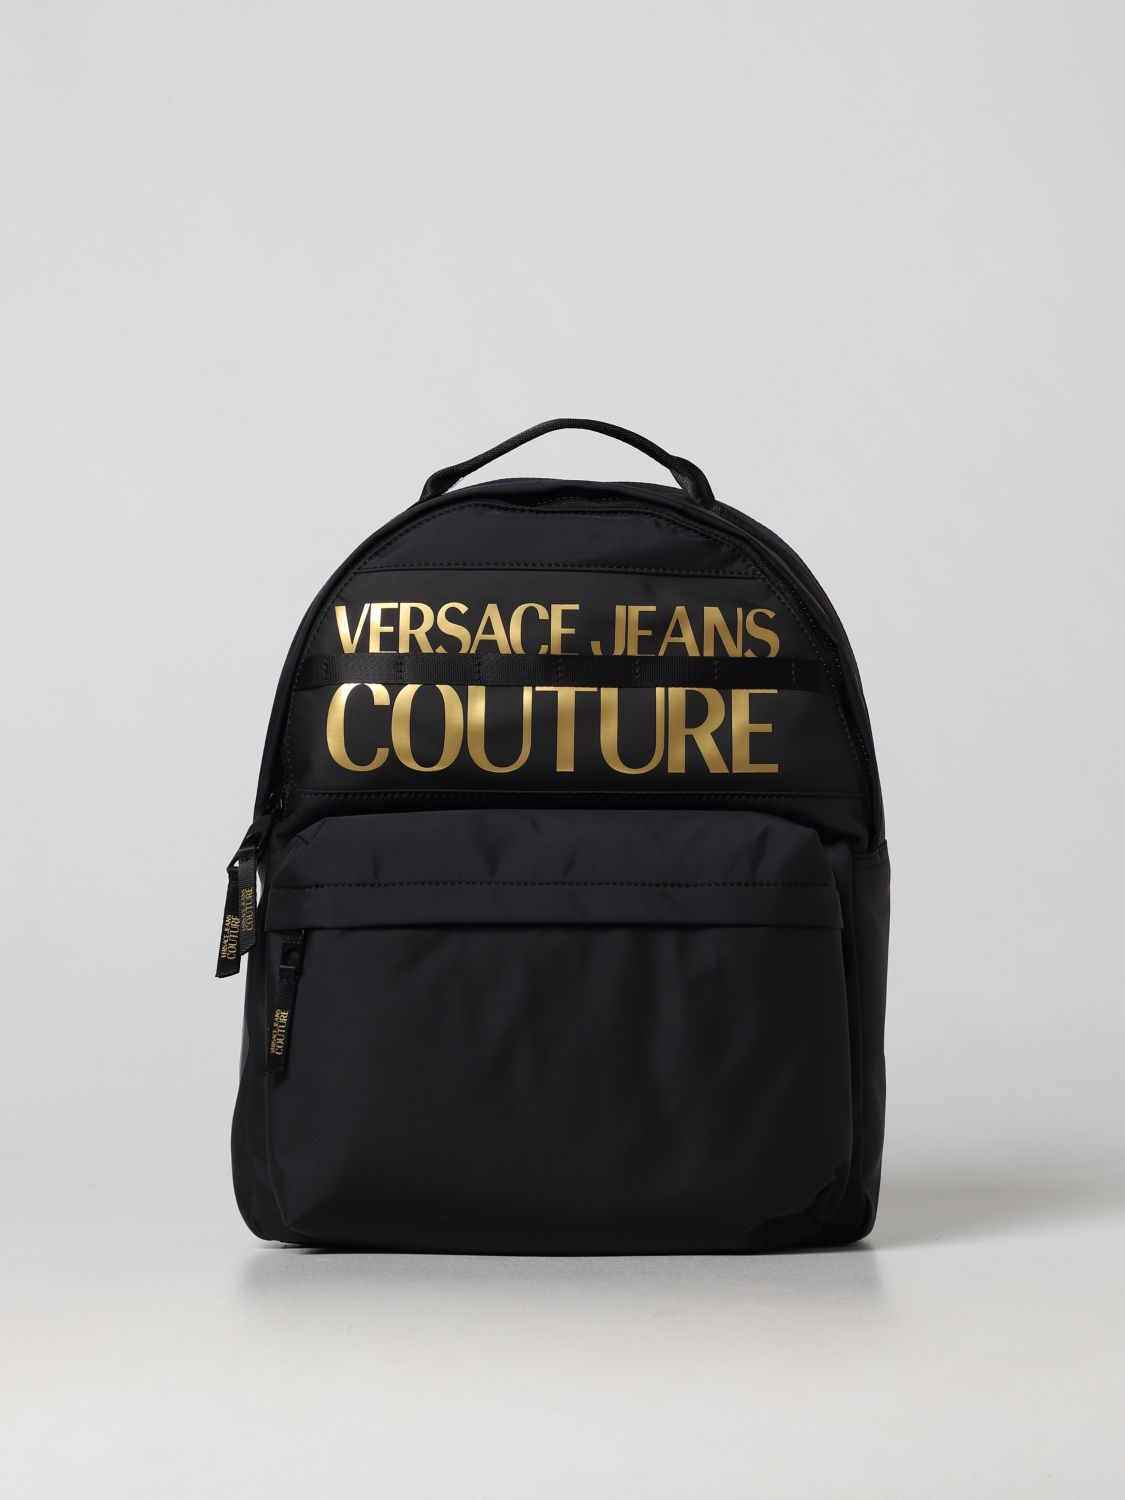 Backpack Versace Jeans Couture: Versace Jeans Couture backpack for men black 1